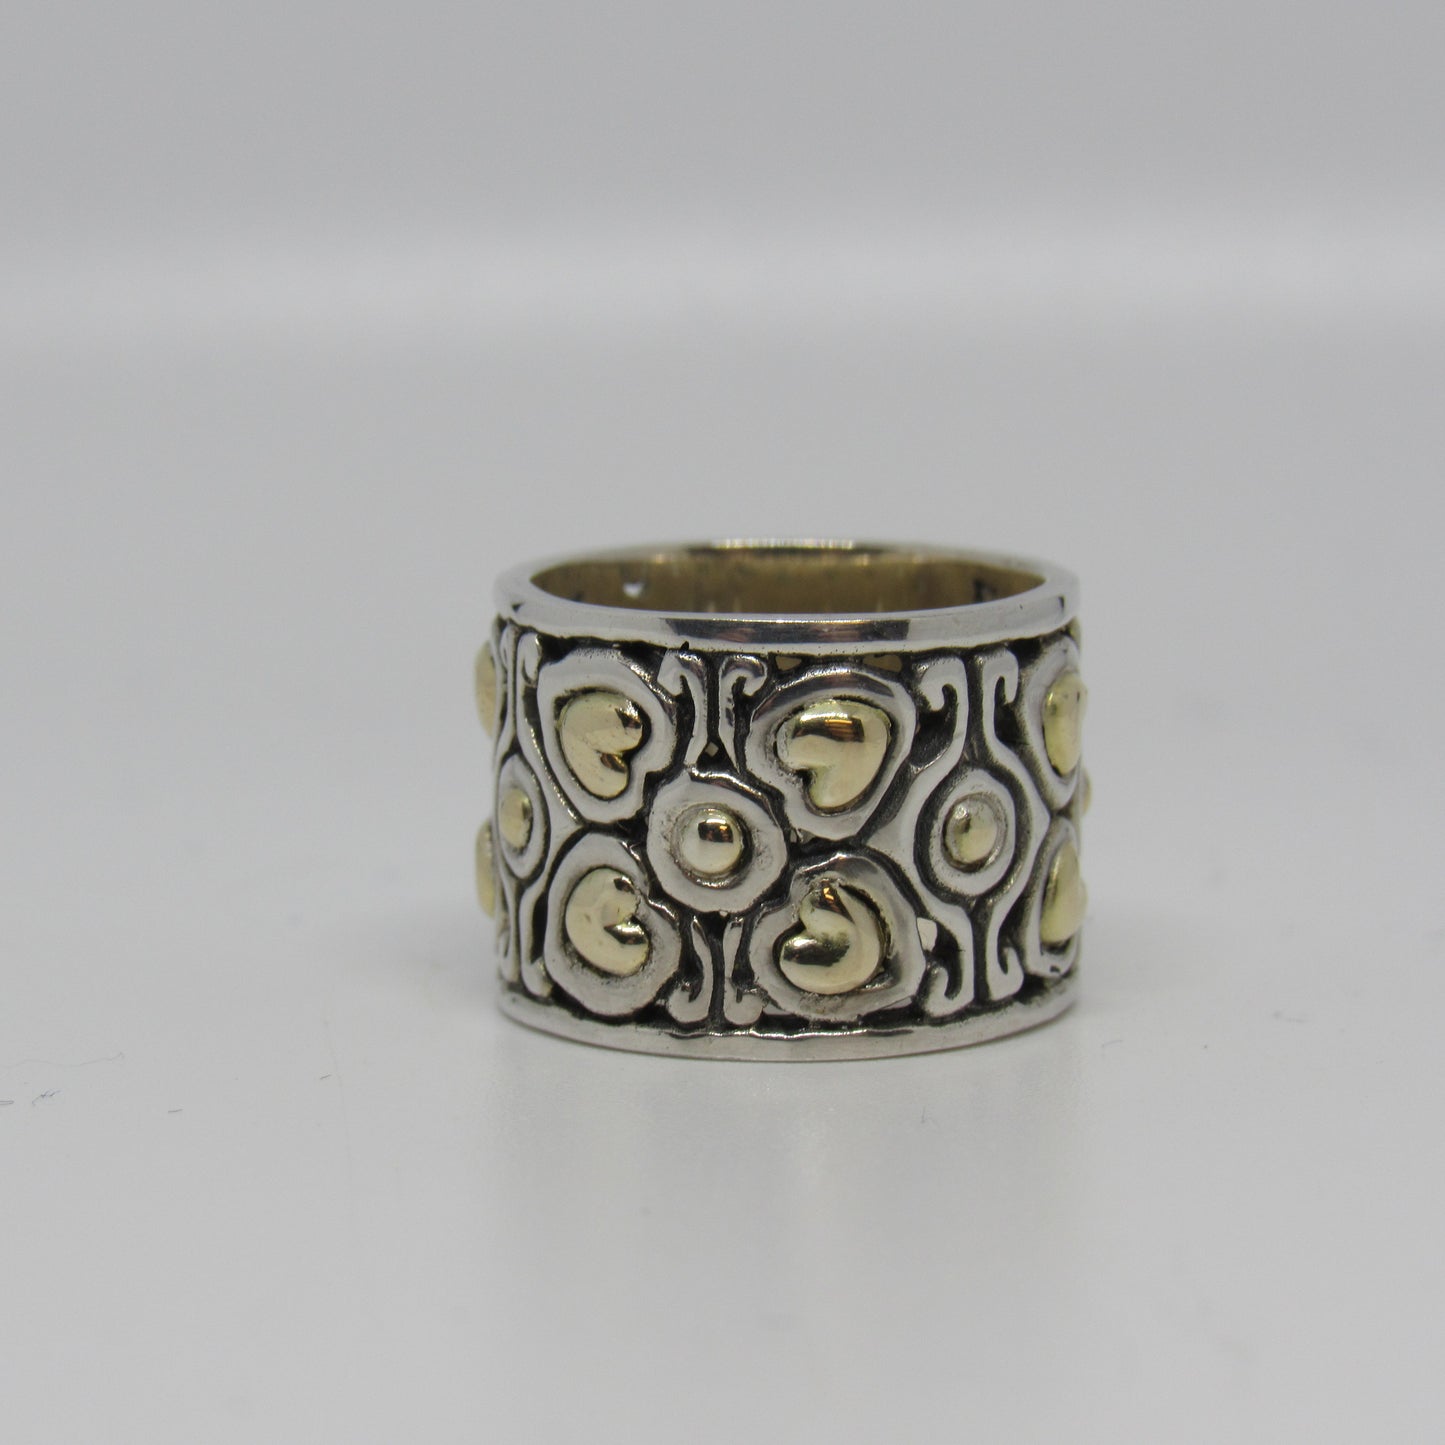 Vintage David Schorr DS/ID Sterling Silver 925 18k Band Ring - Size 5.75